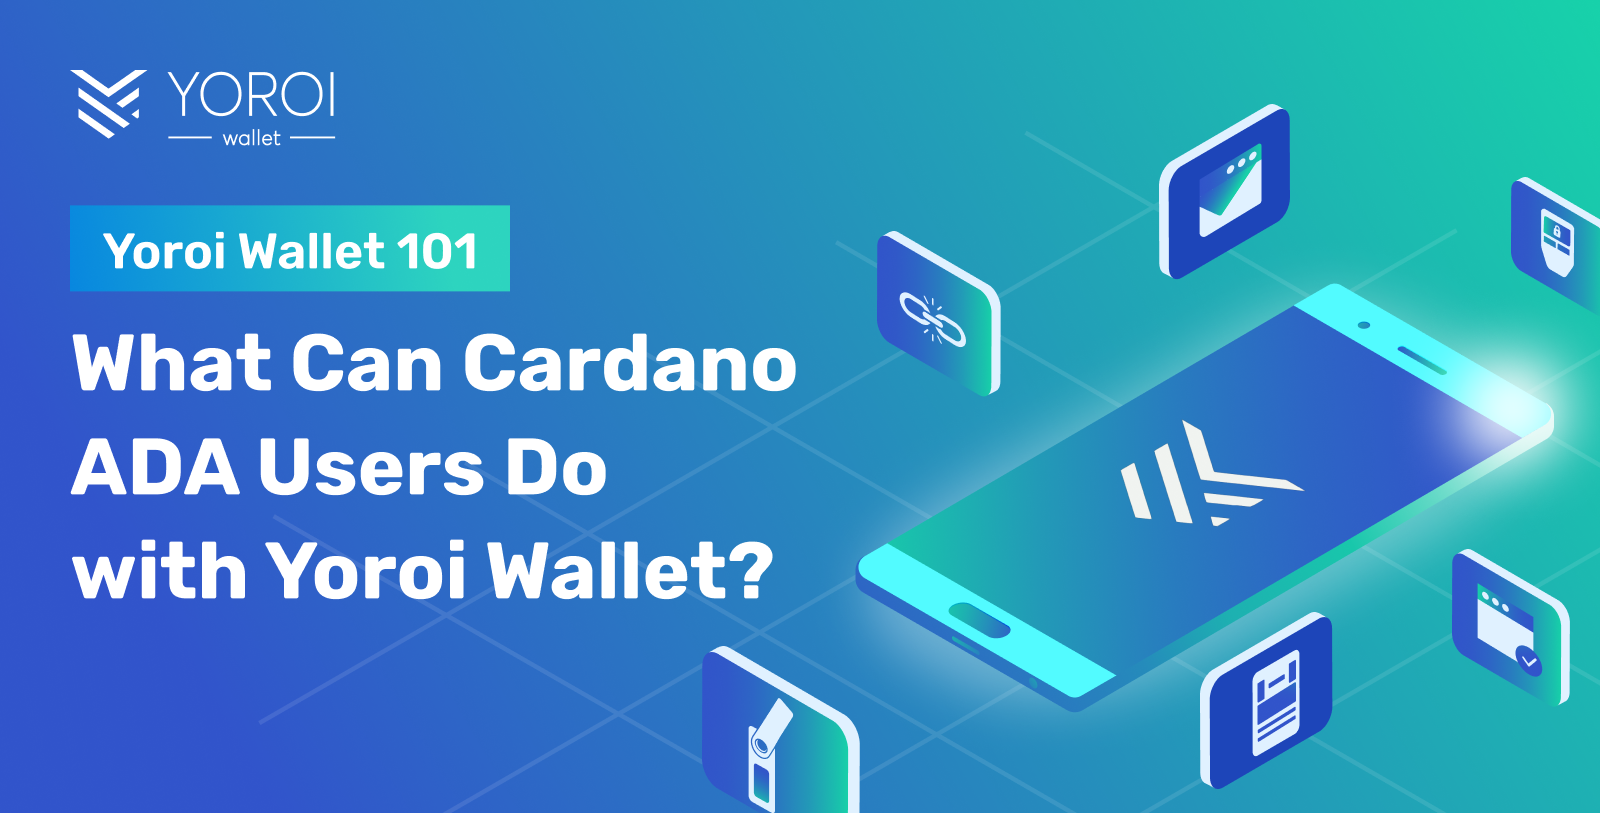 Yoroi-Wallet-101_-What-Can-Cardano-ADA-Users-Do-with-Yoroi-Wallet.png